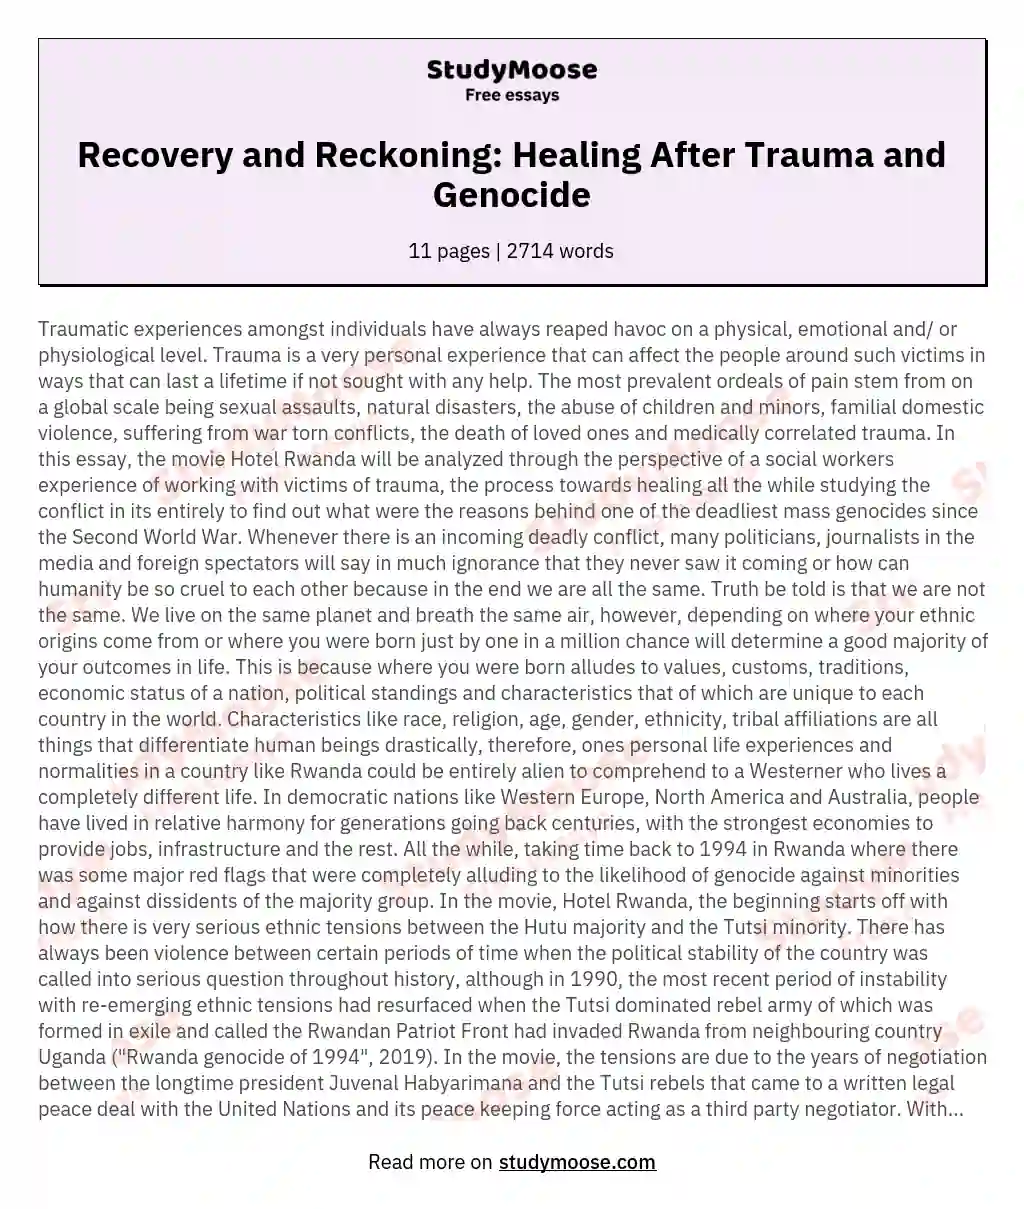 Recovery and Reckoning: Healing After Trauma and Genocide essay